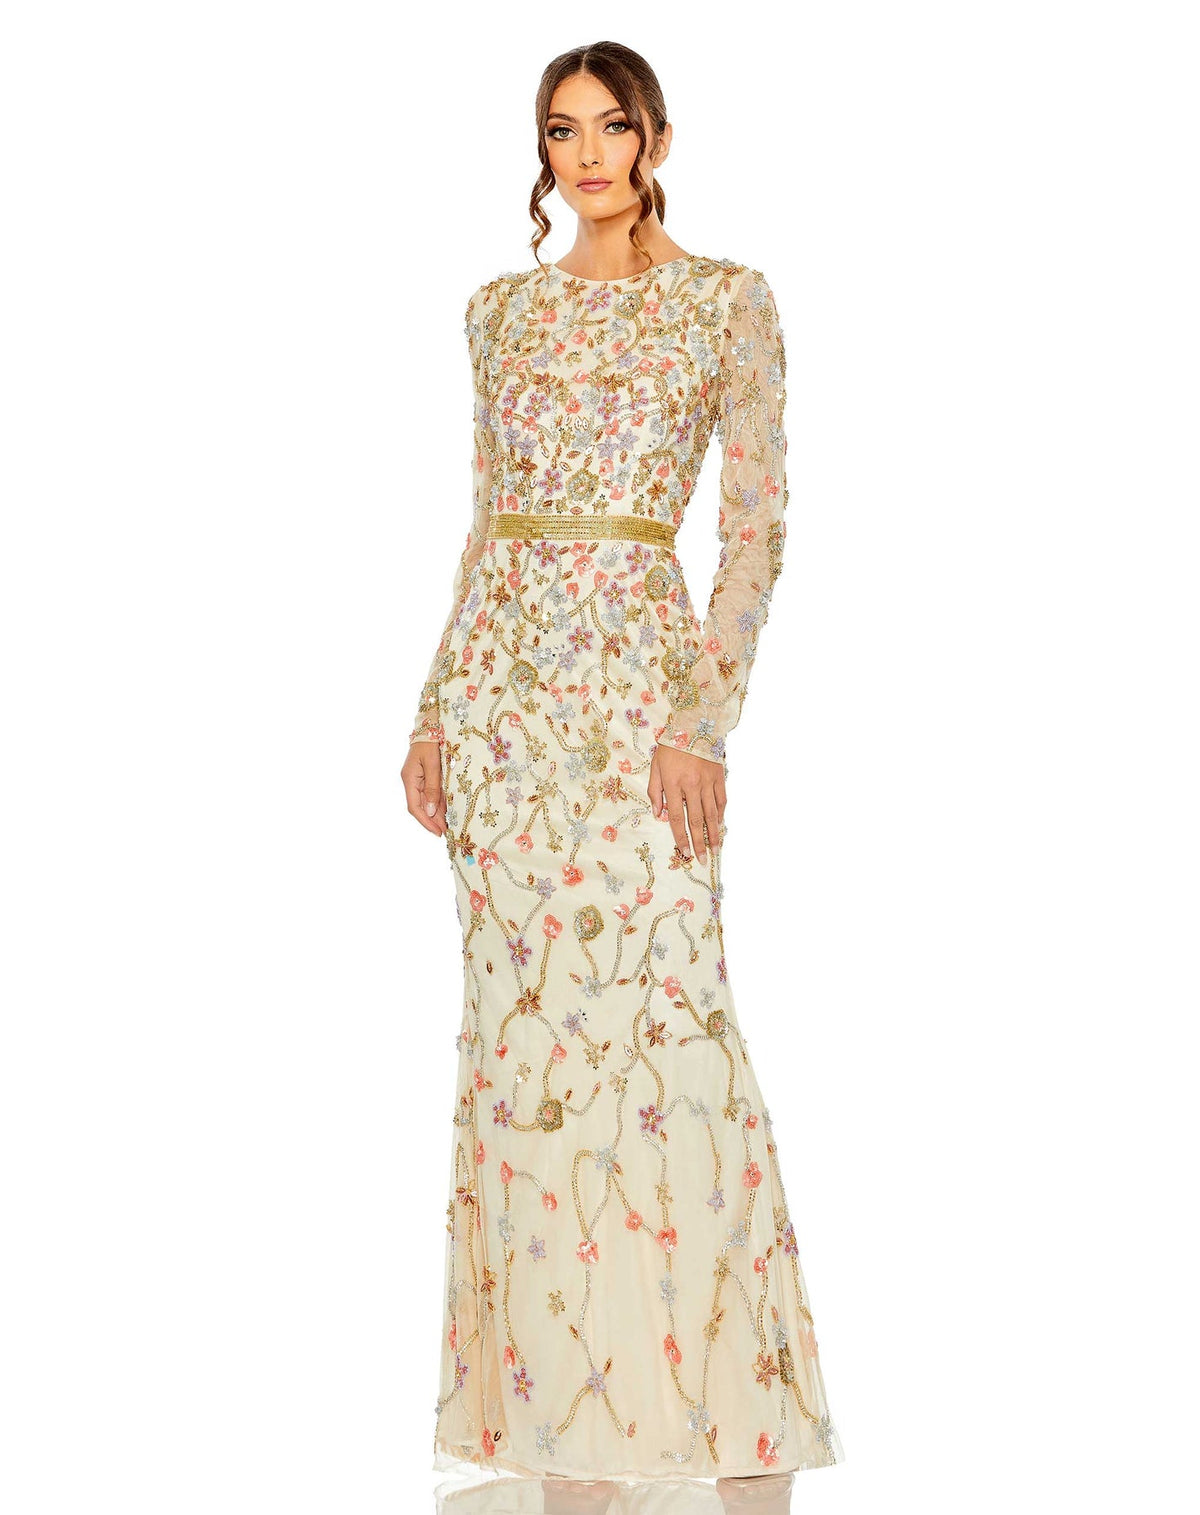 Long sleeve floral crystal embellished modest gown - Nude